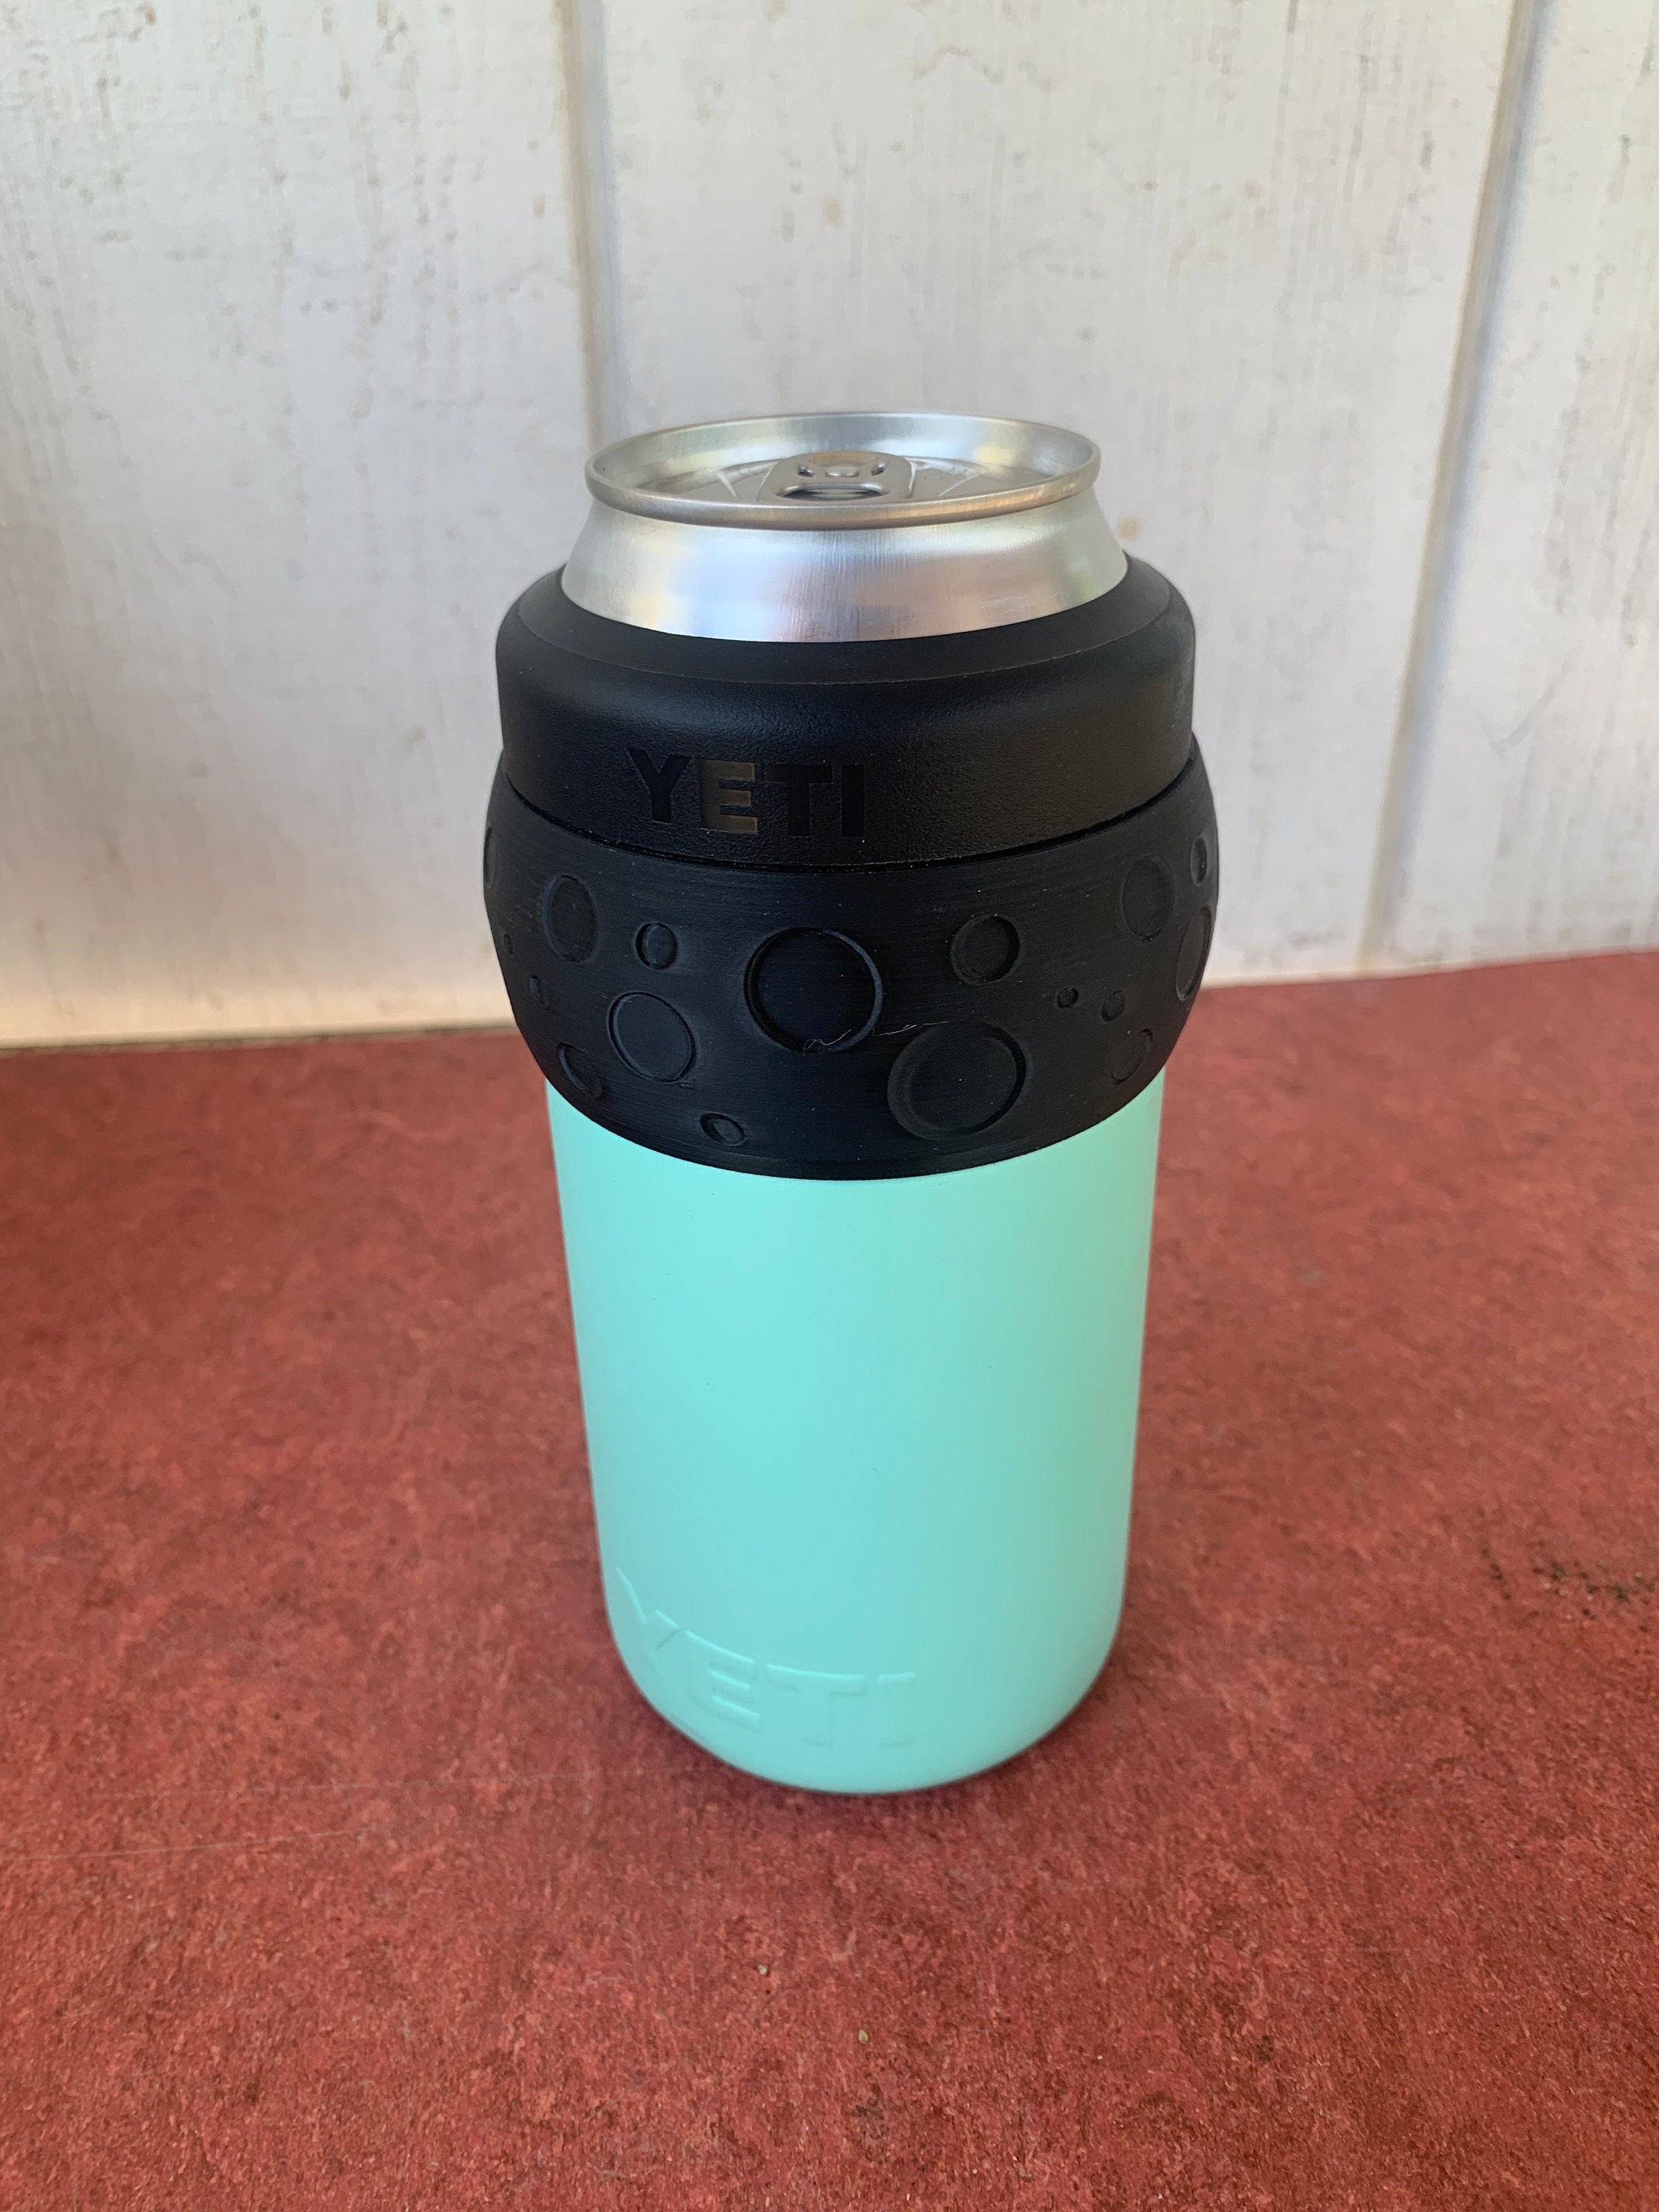 Yeti Koozie Colster 12 to 16oz Adapter 1ST GEN ONLY